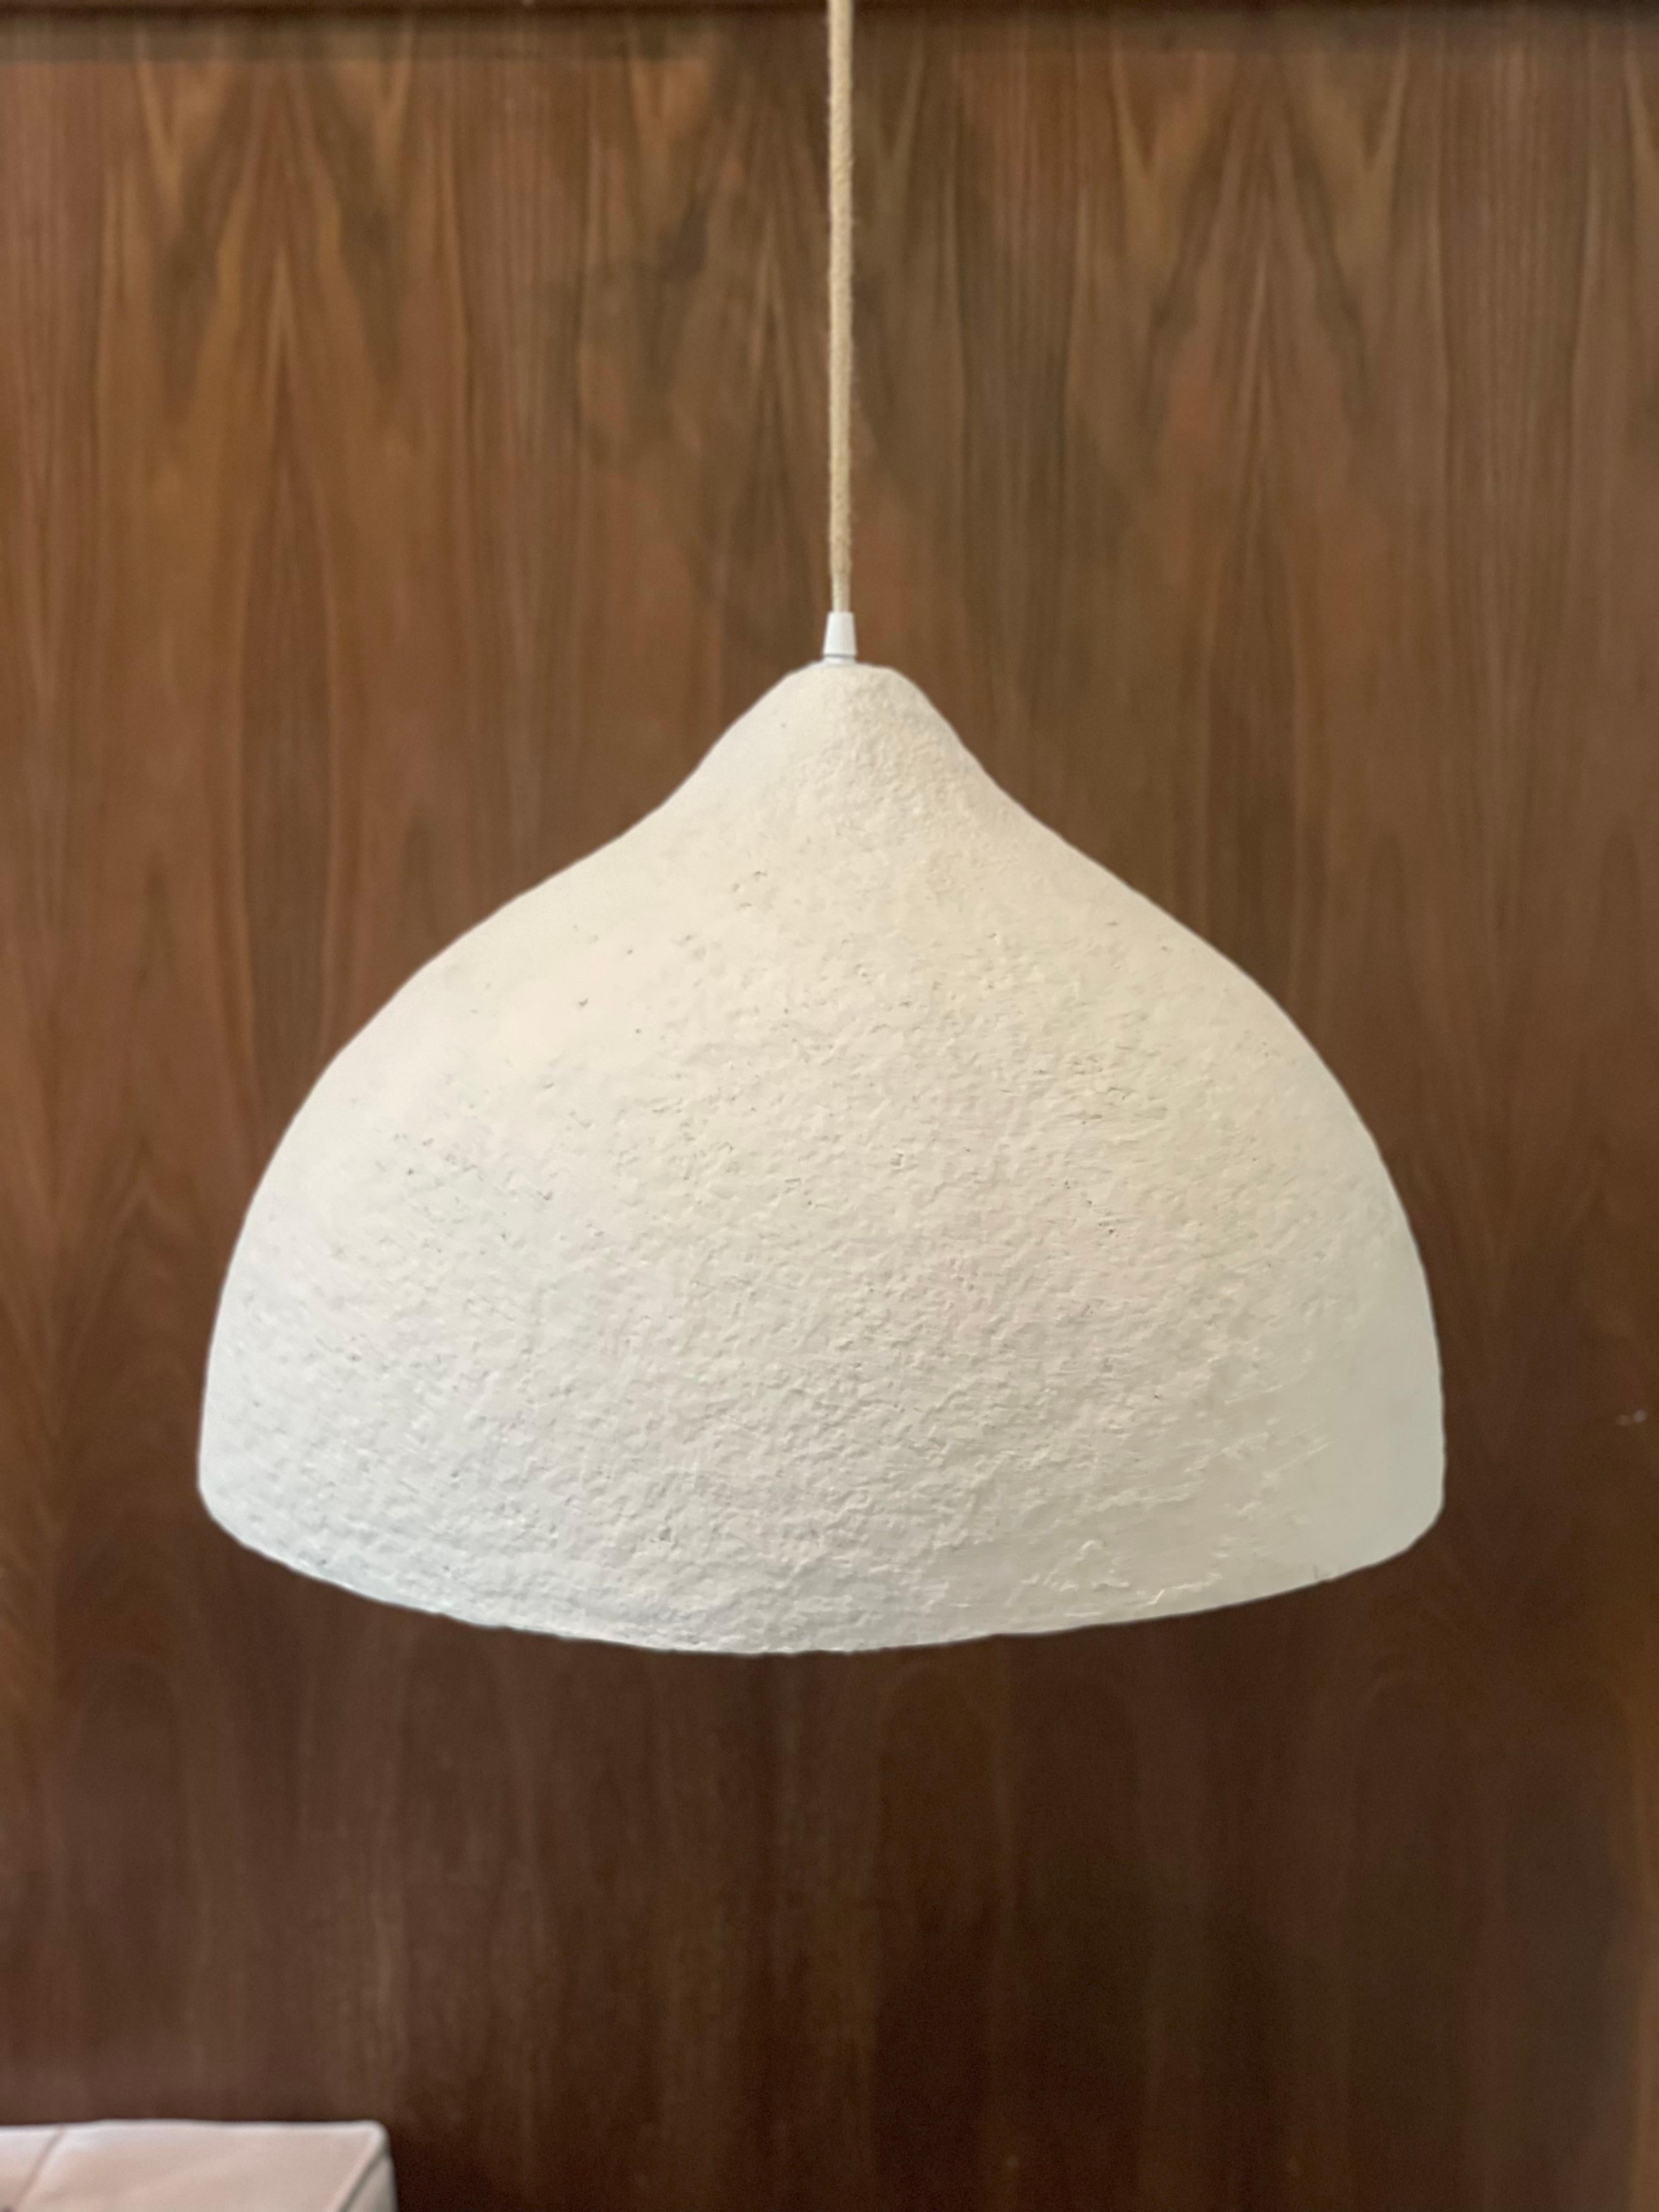 Small luna pendant Lamp by Ana Tron
Handmade
Dimensions: D 35 x H 30 cm
Materials: Recycled paper with paste, paint chalk, and matt water-based varnish. Internal cover of ecological epoxy resin.
Available in black, Oxford gray, and